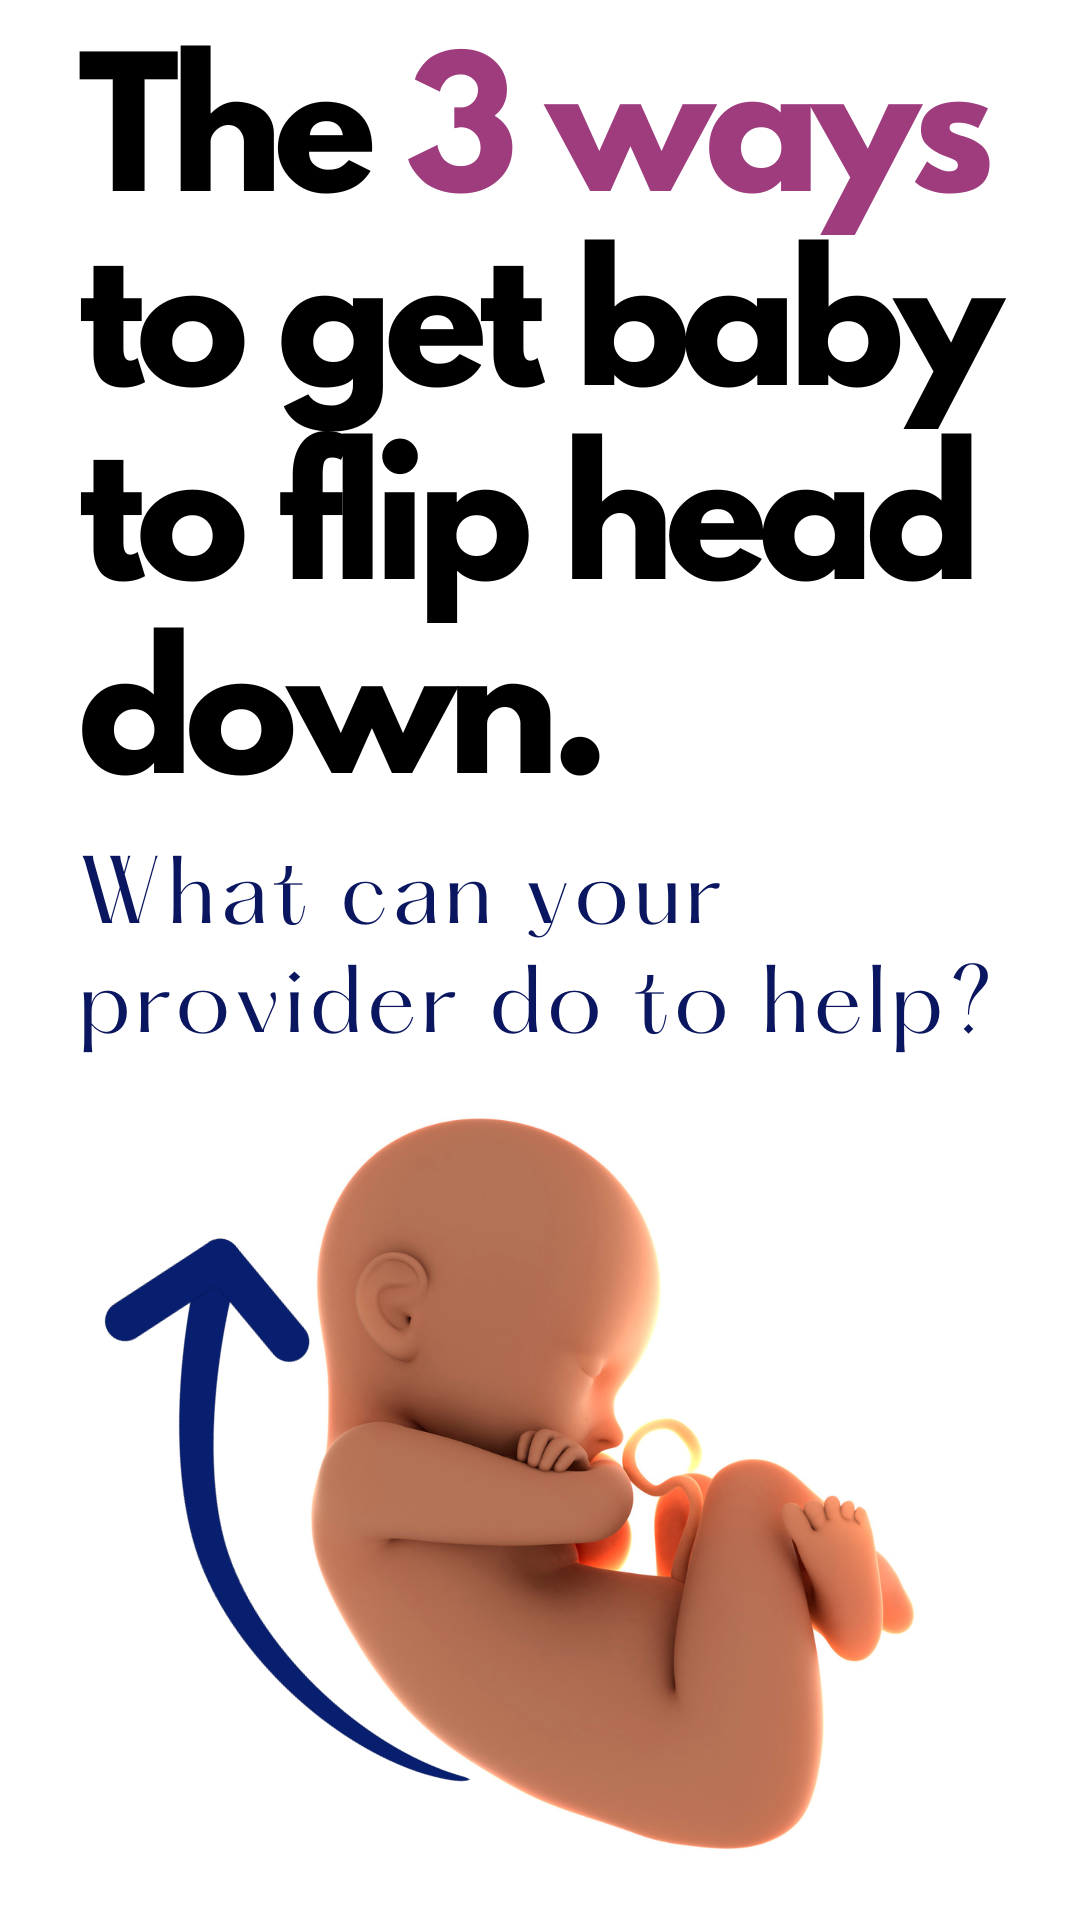 fetus, with an arrow / the 3 ways to get baby to flip head down / what can you provider to do help?